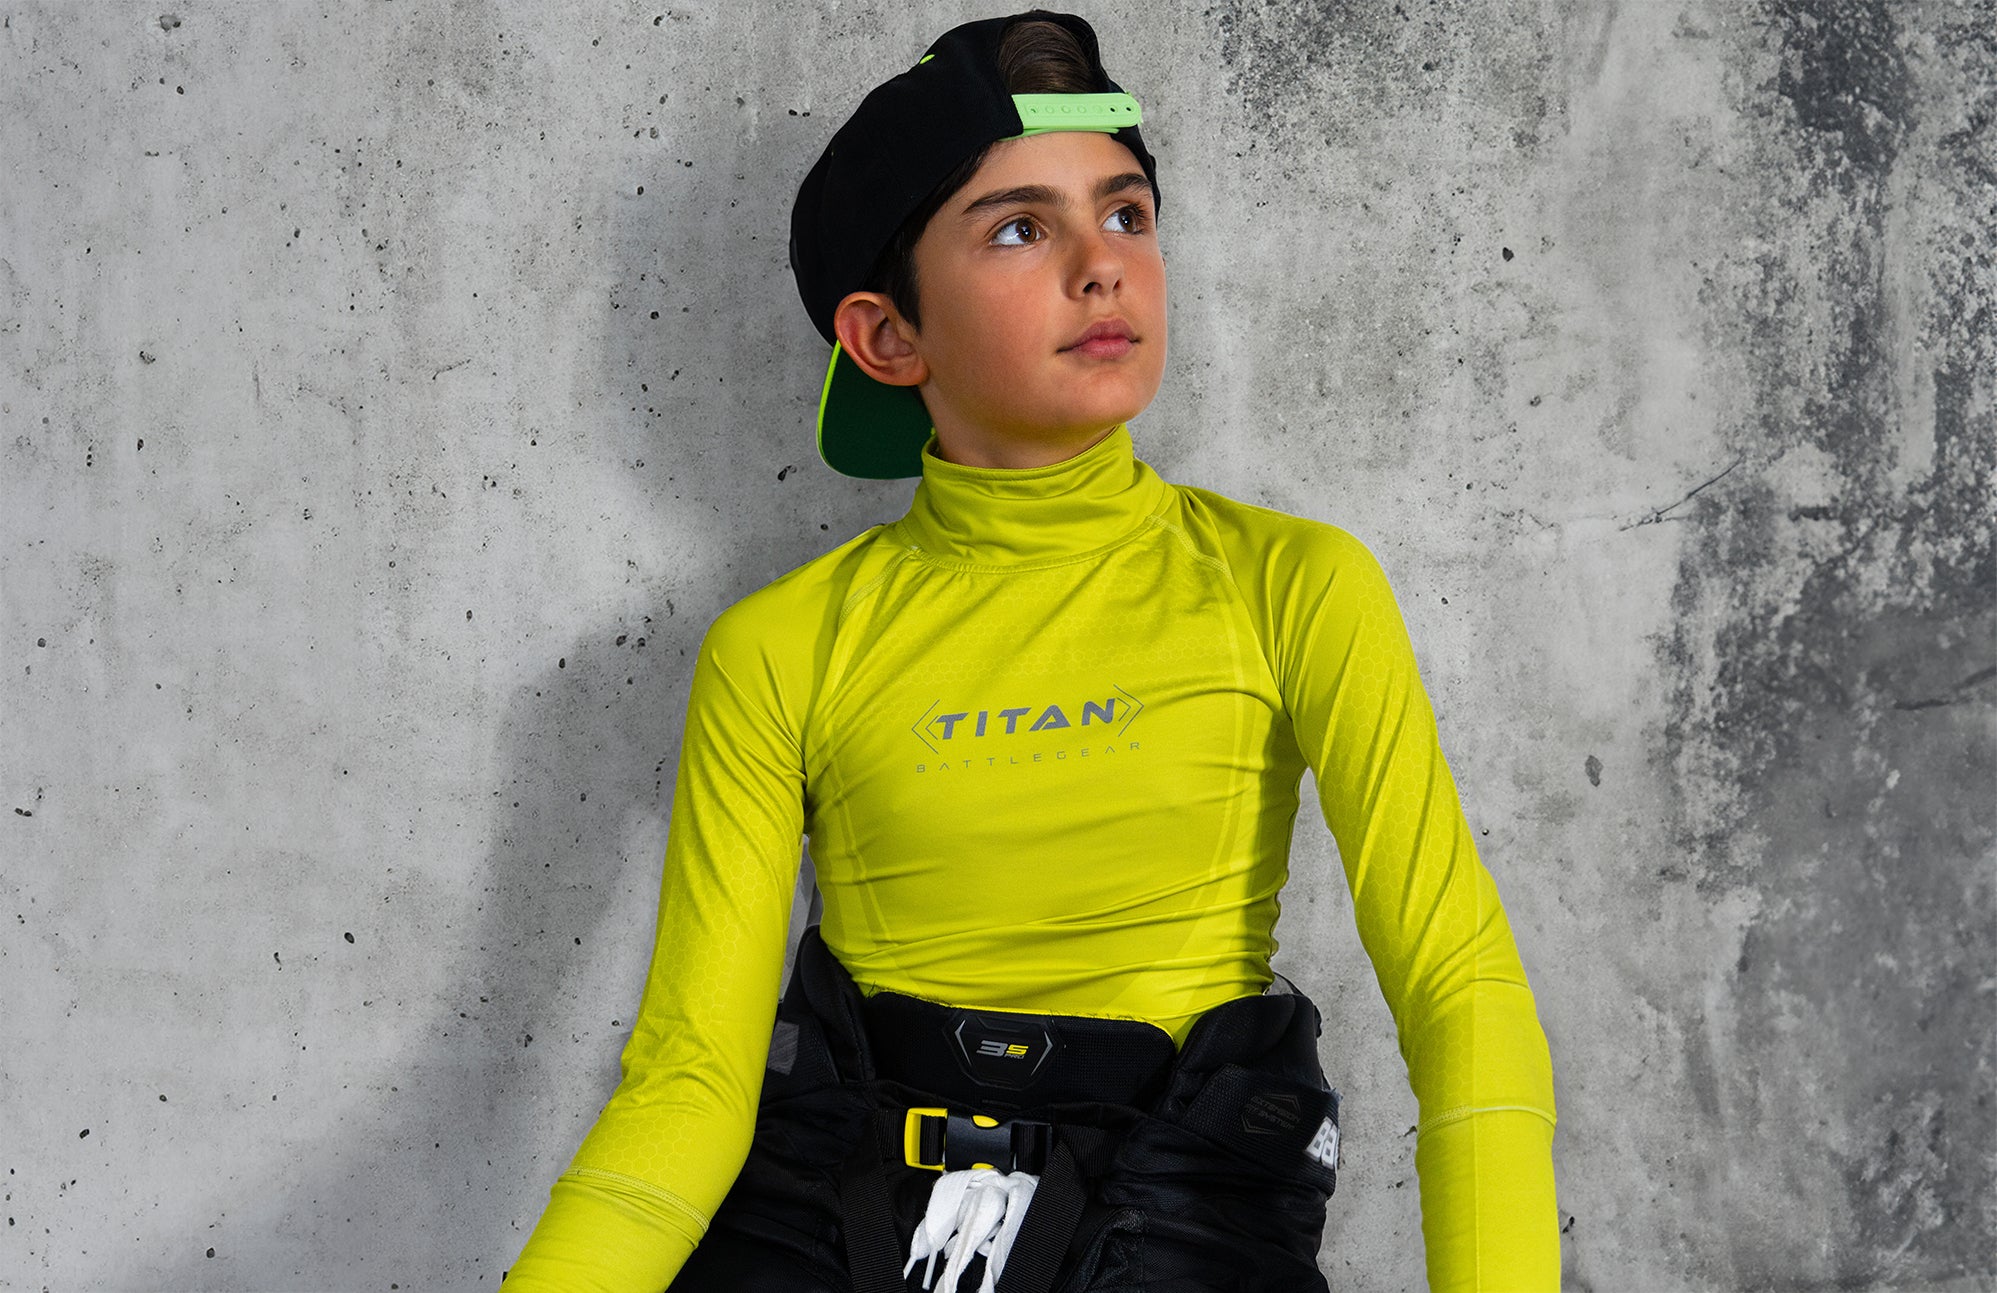 A youth hockey player wearing a bright yellow Titan BattleGear shirt with the Titan logo on the chest. The player is also wearing black hockey pants and a black cap with a green brim, sitting against a concrete wall.